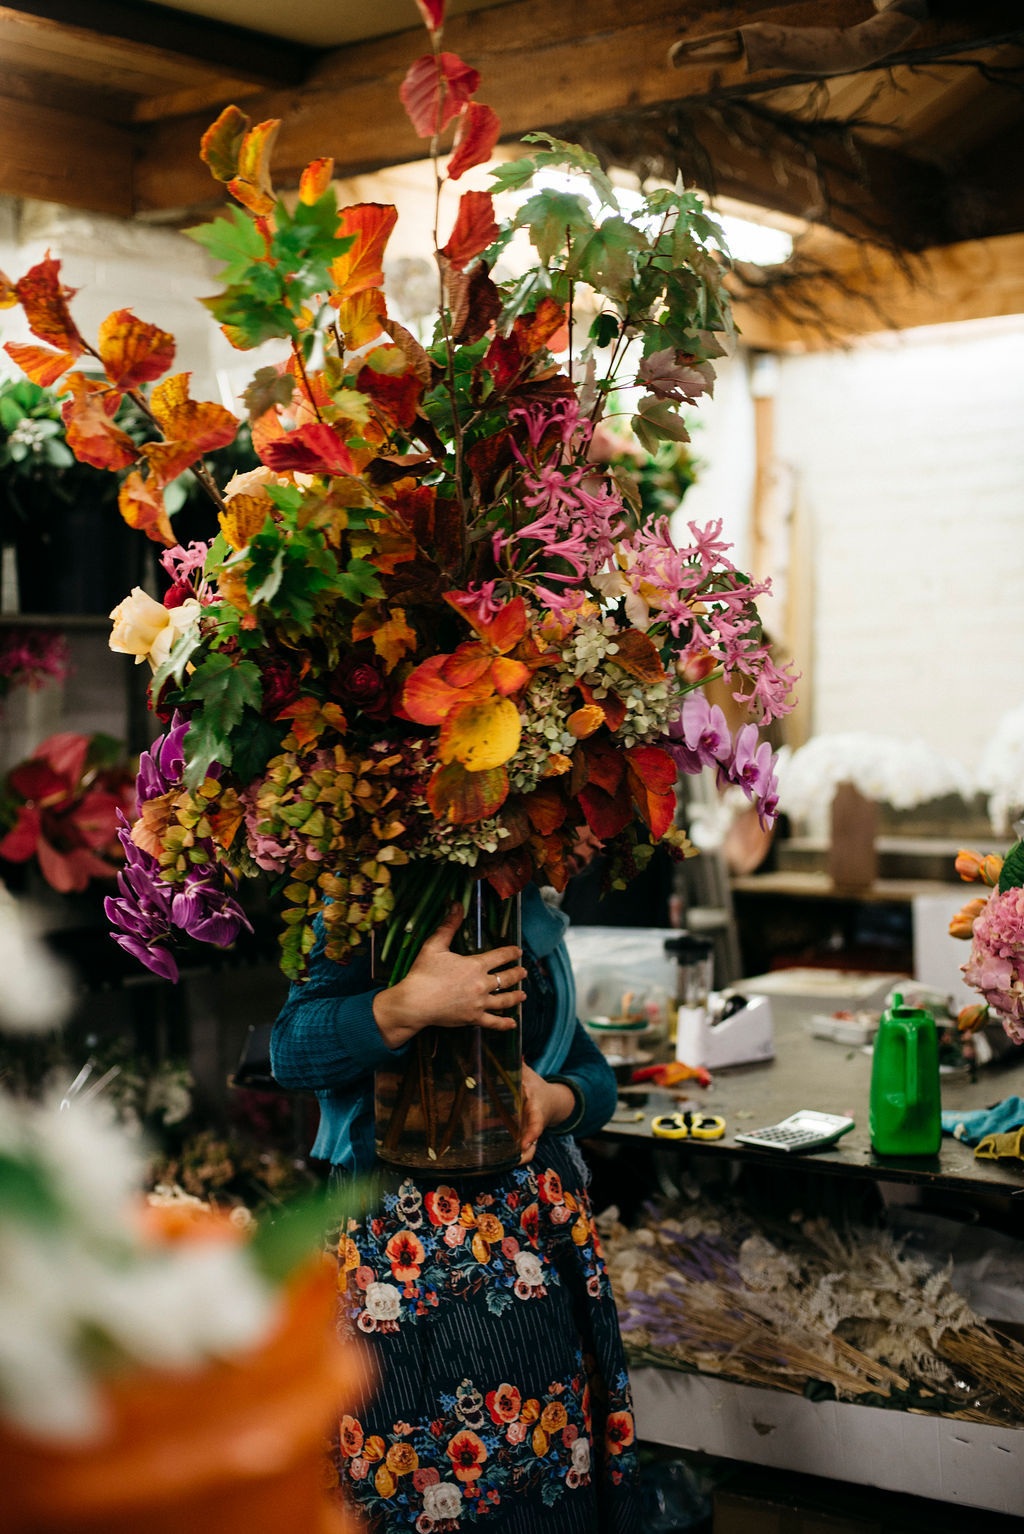 This photograph depicts a woman holding a very large glass vase of flowers. The flowers are brightly coloured pink, orange and purple. The vase also contains branches of orange and green leaves.